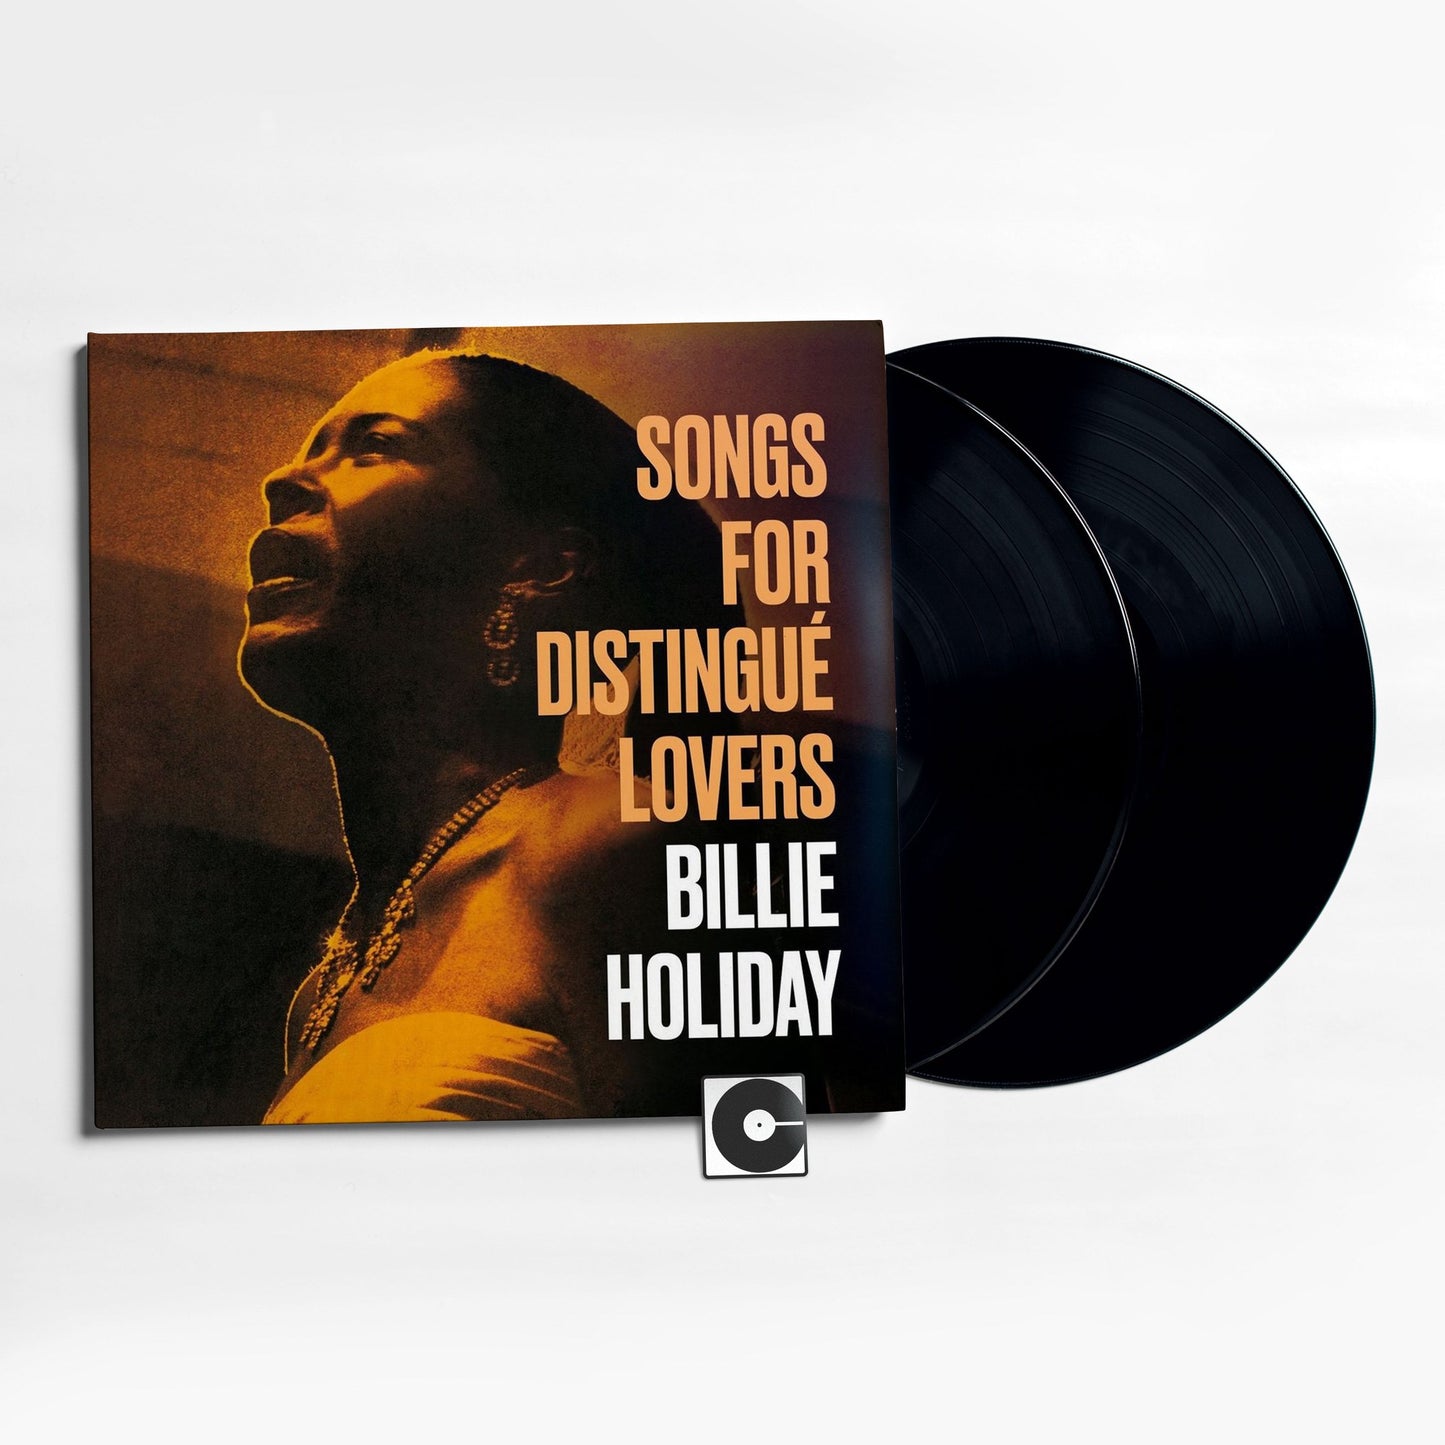 Billie Holiday - "Songs For Distingue Lovers" Analogue Productions